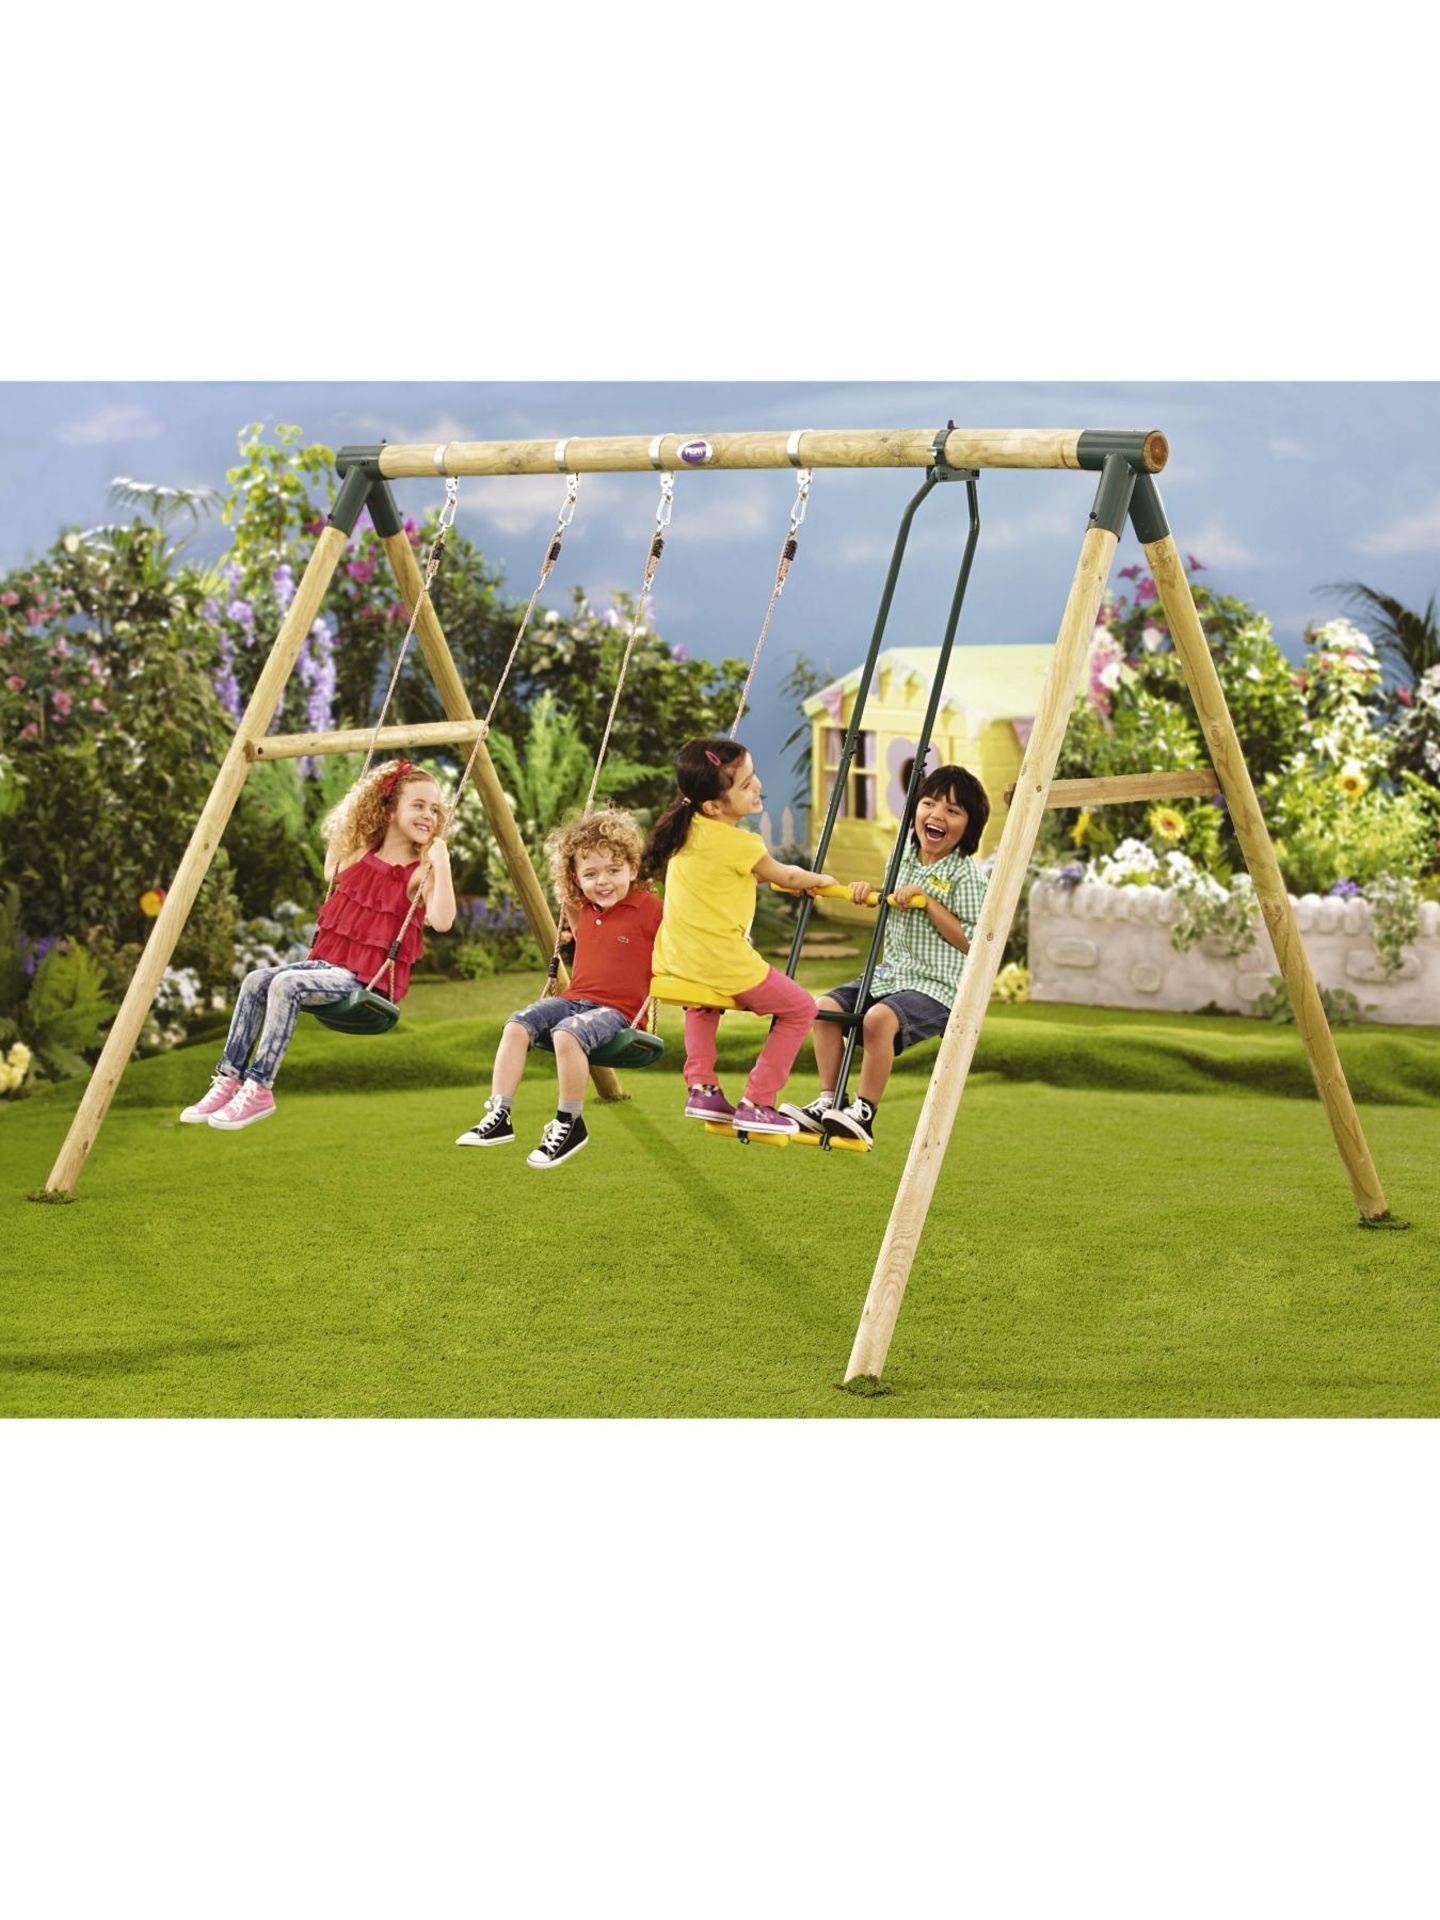 (10 PALLET S) 120 x Plum Double Swing with Glider Wooden Garden Swing Set. RRP £249.99 EACH. A - Image 2 of 3